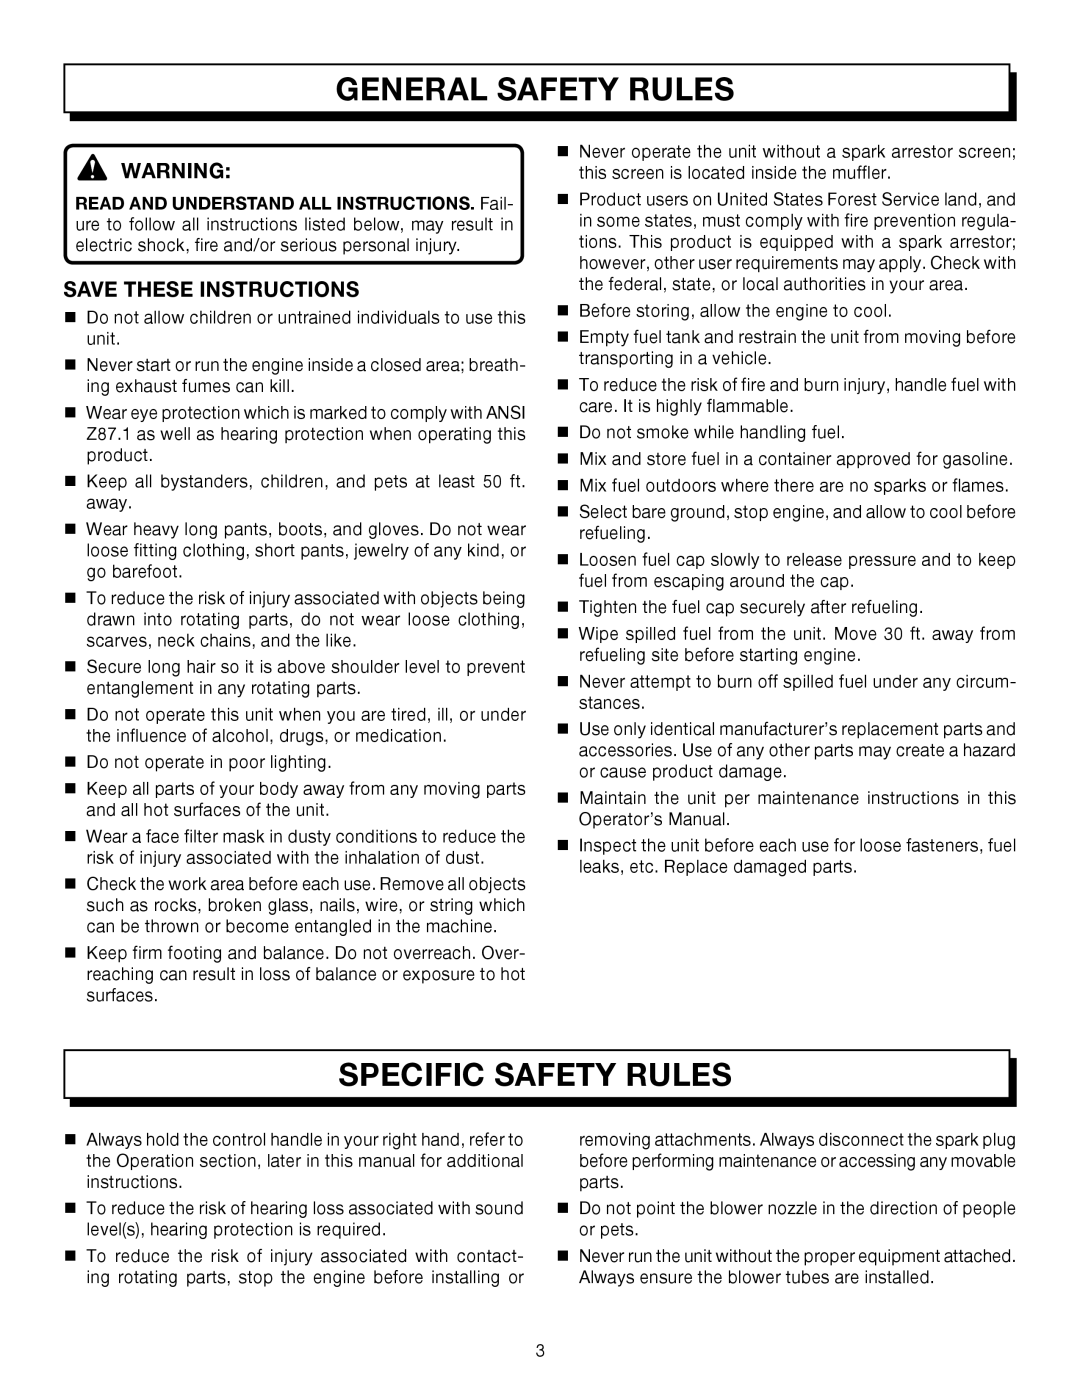 Homelite UT08512B manual General Safety Rules, Specific Safety Rules, Save These Instructions 